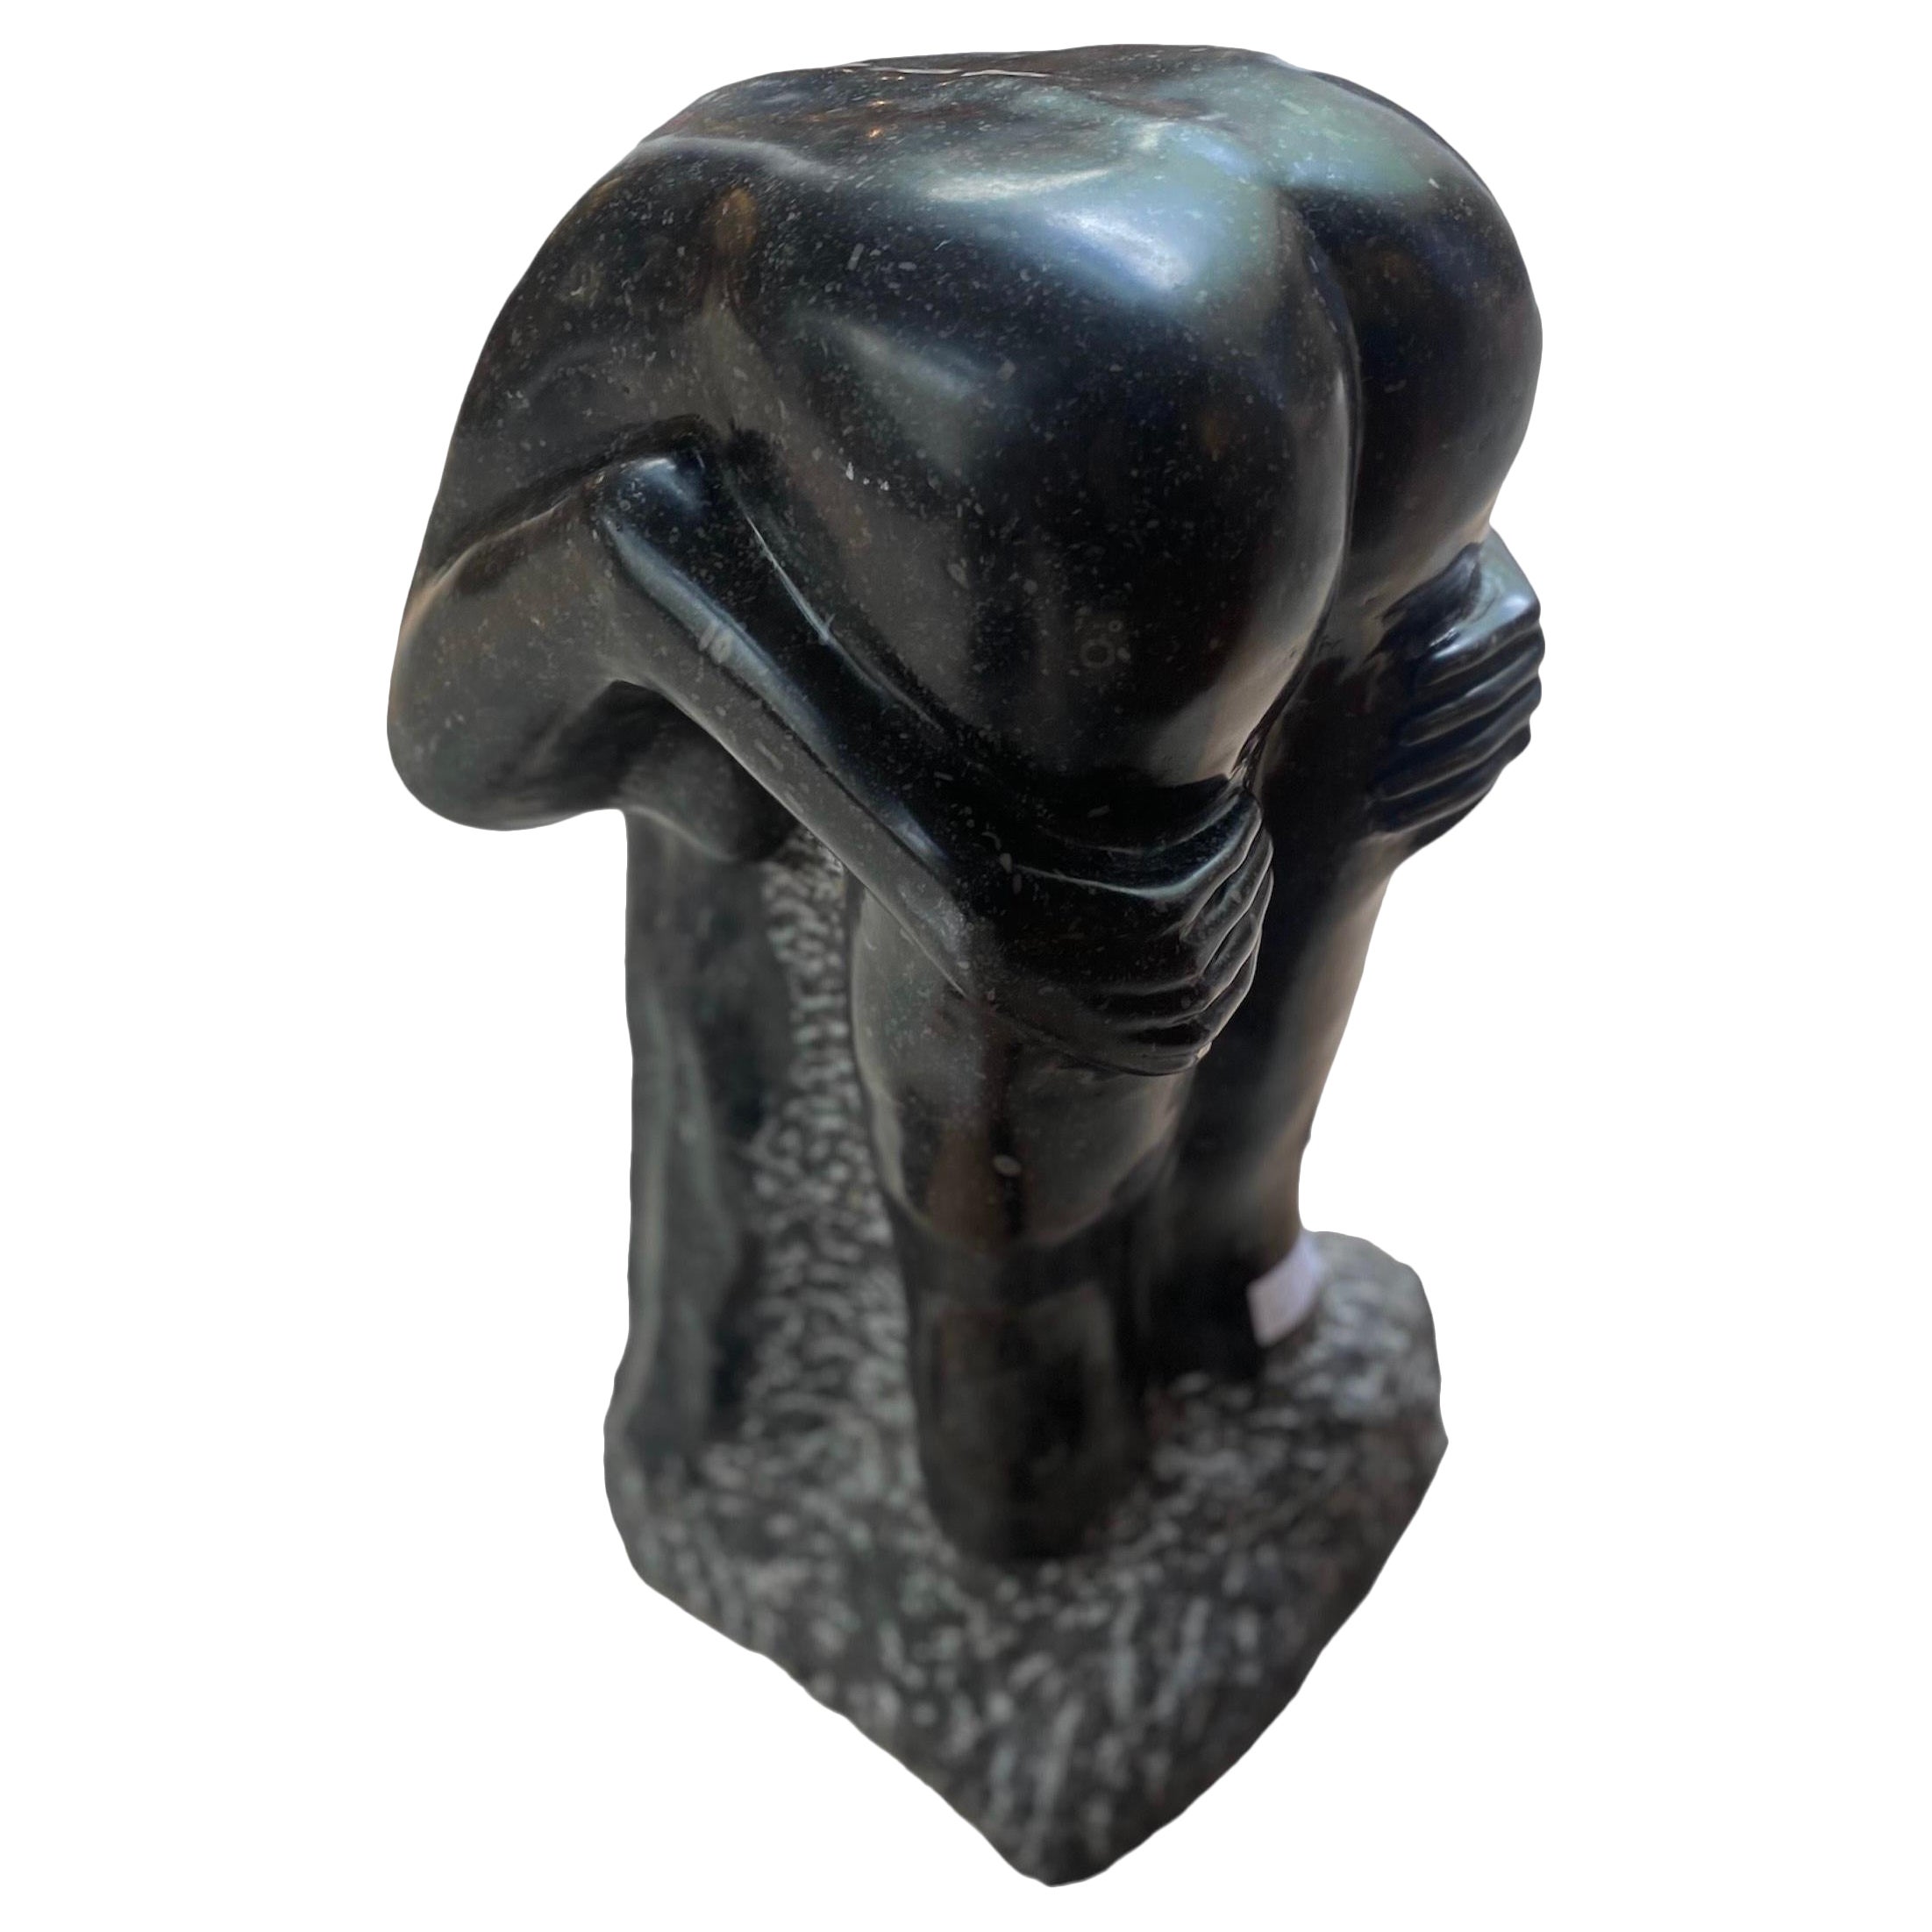 Sculpture by Bruno Quoilin 'xx' Female Nude, Black Marble Sculpture